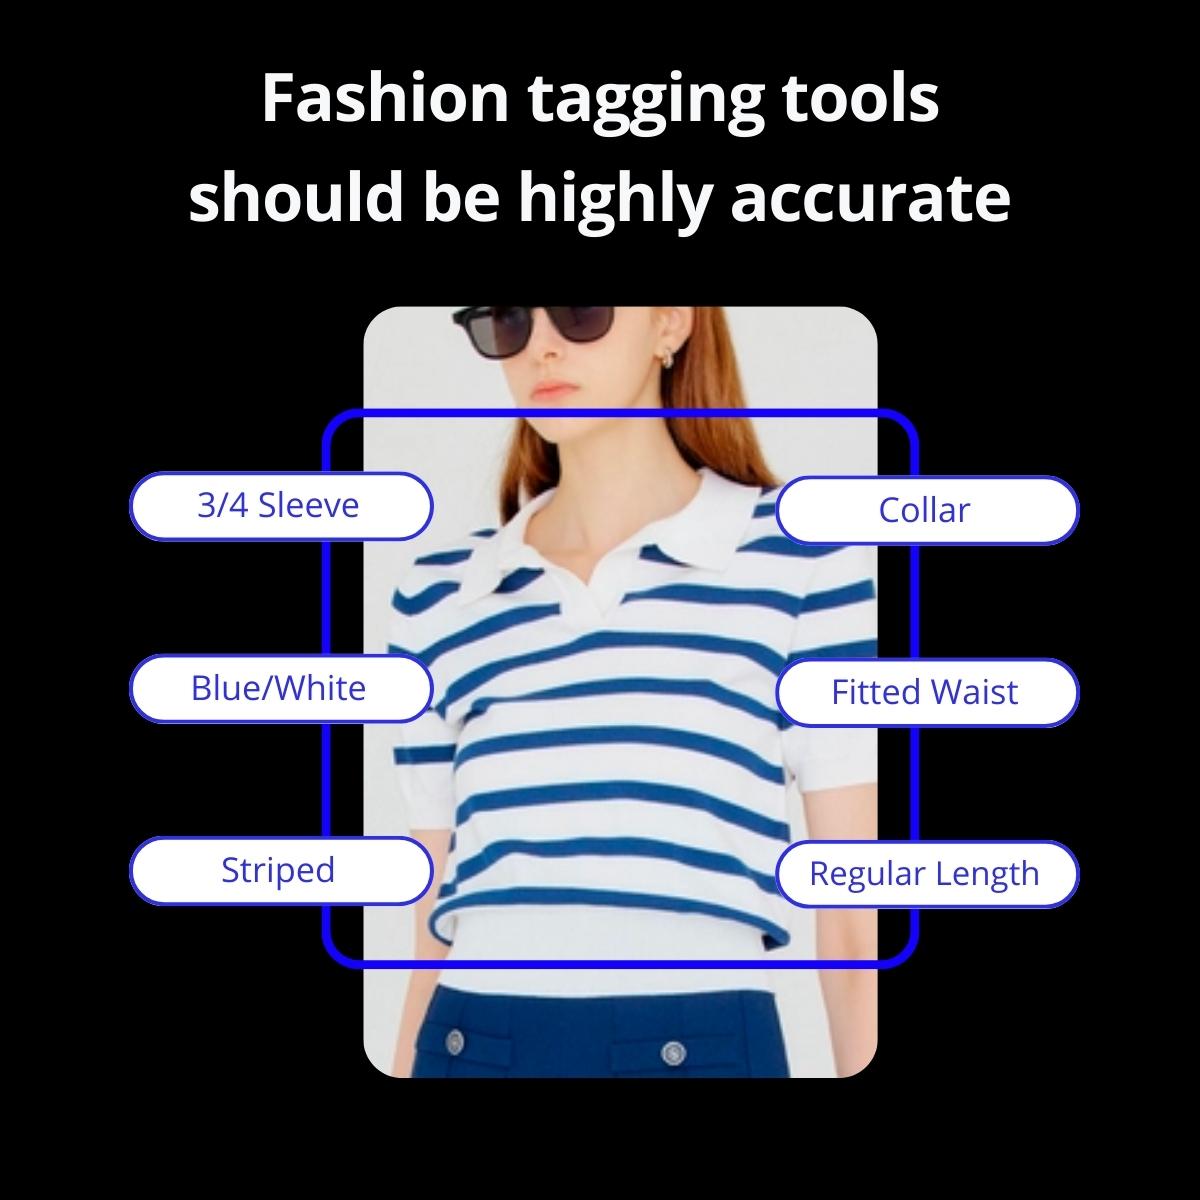 Fashion tagging tools should have a high level of accuracy